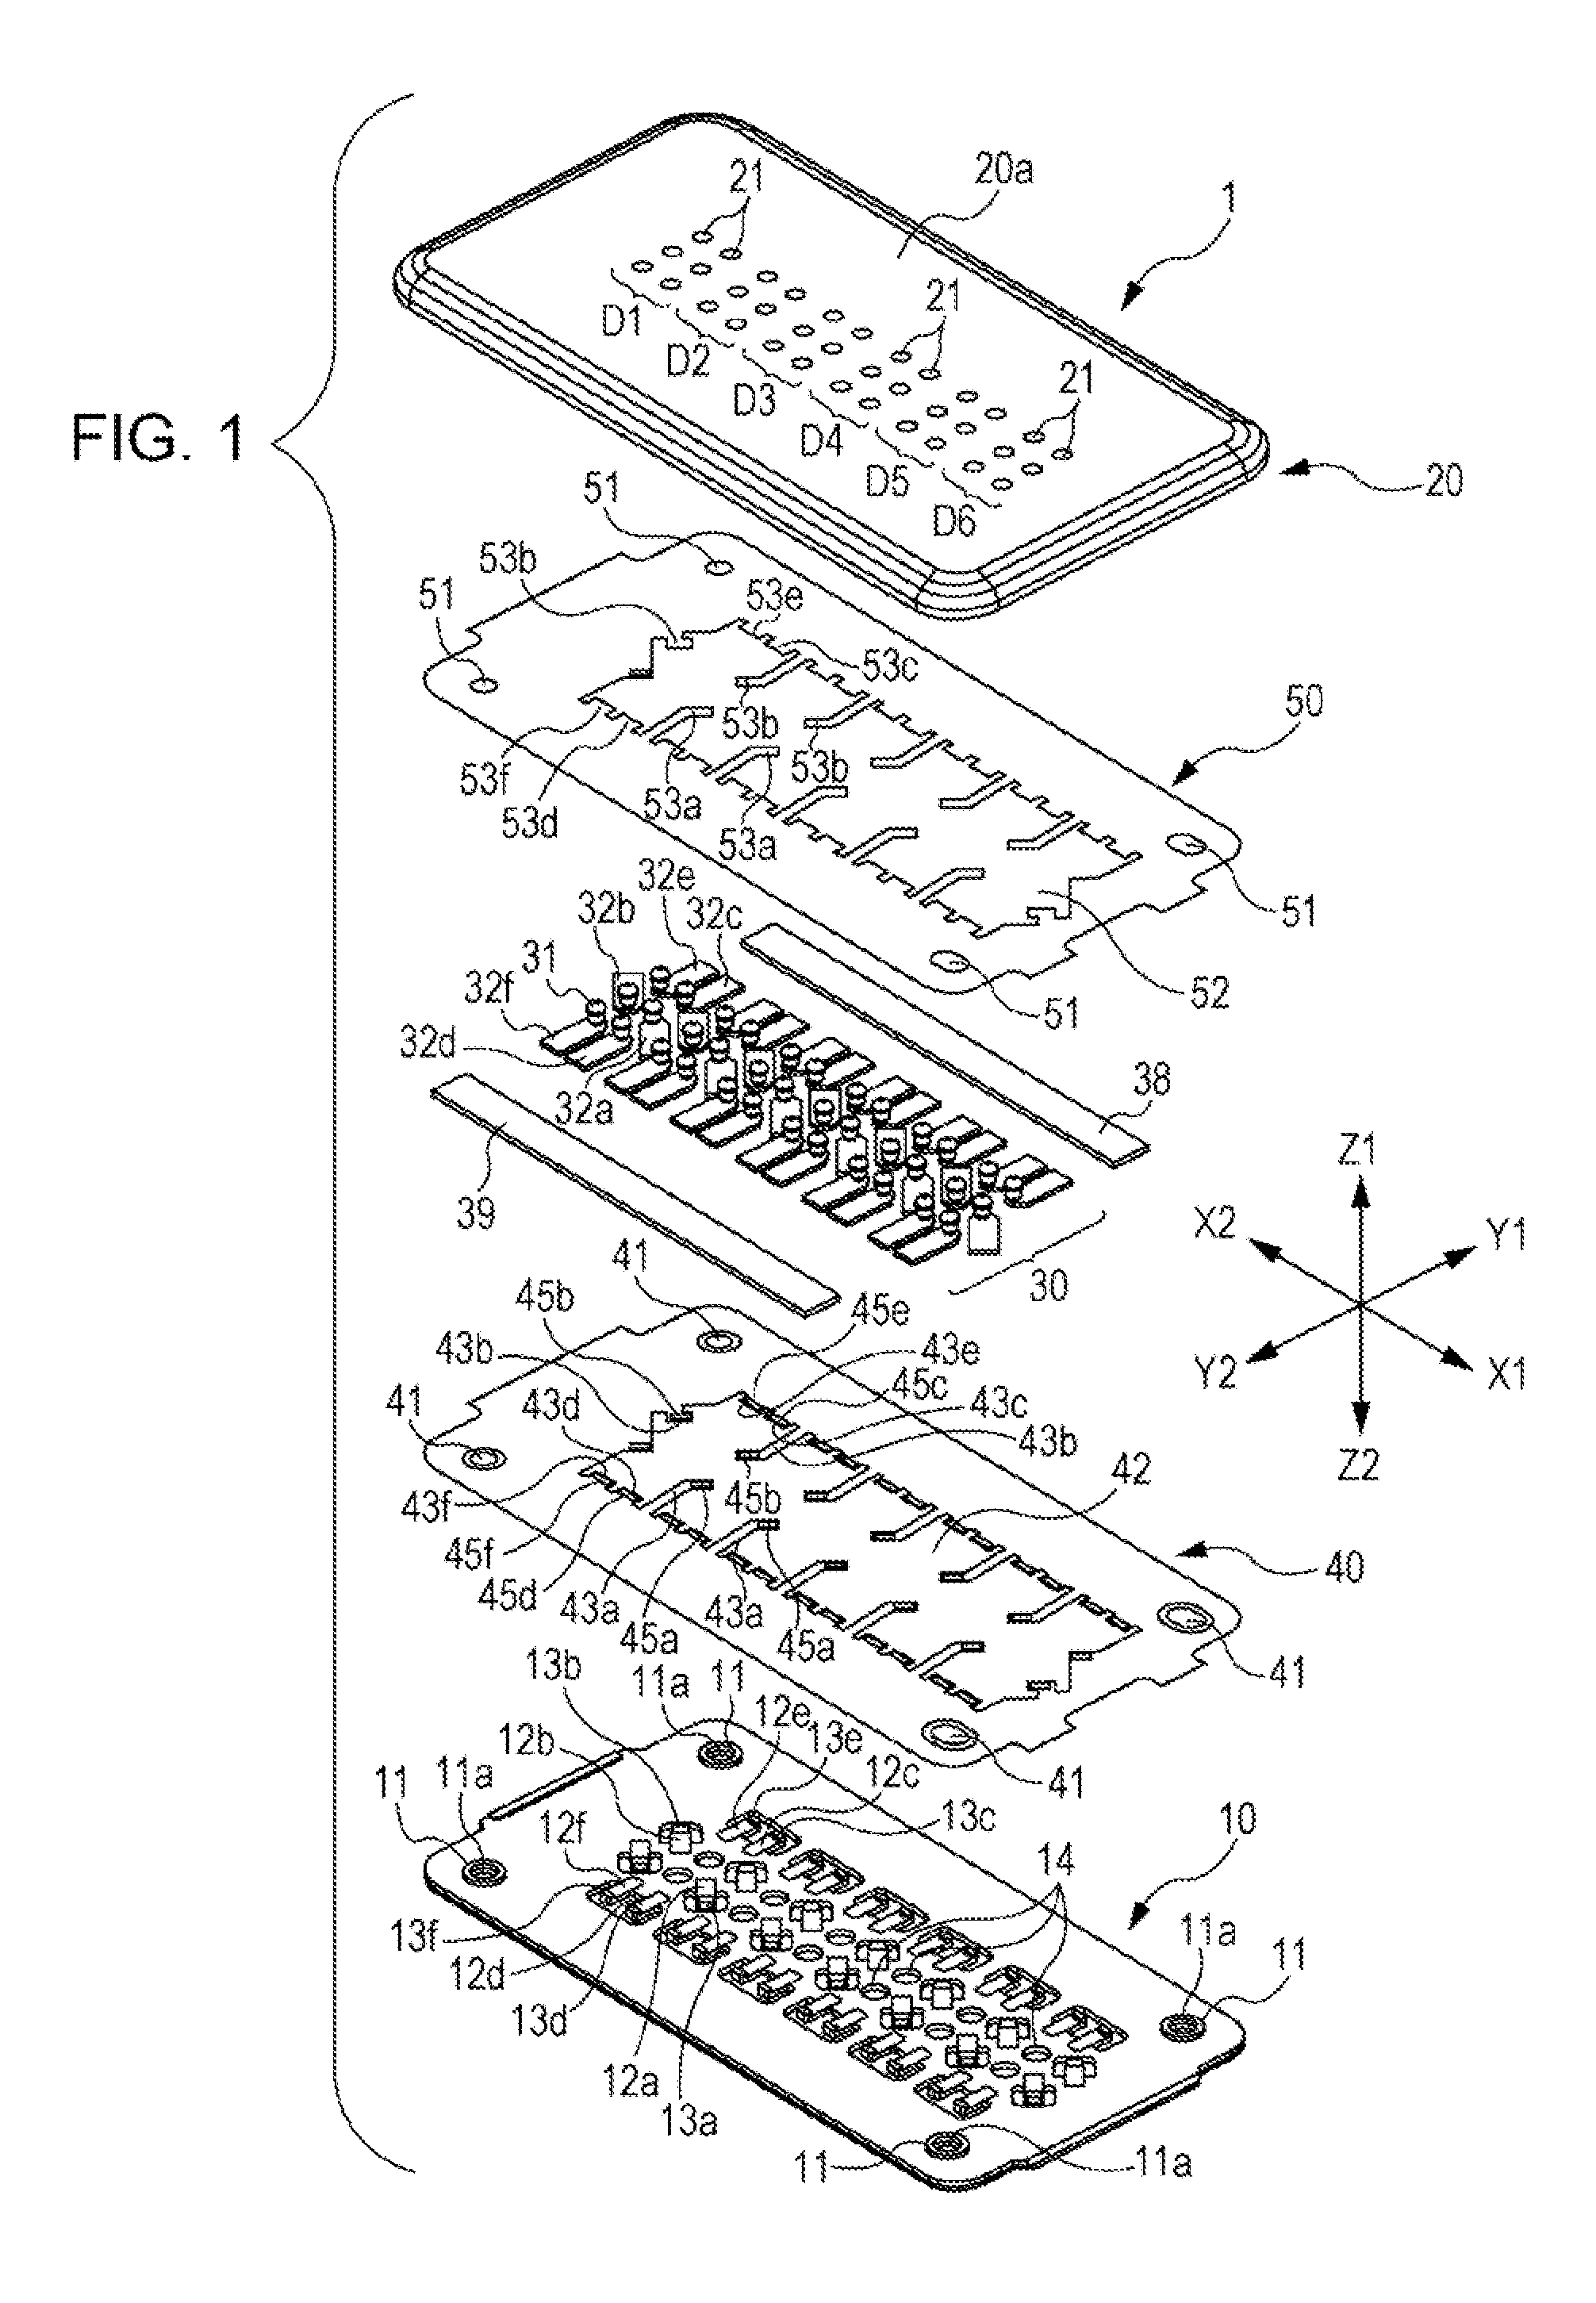 Tactile display device